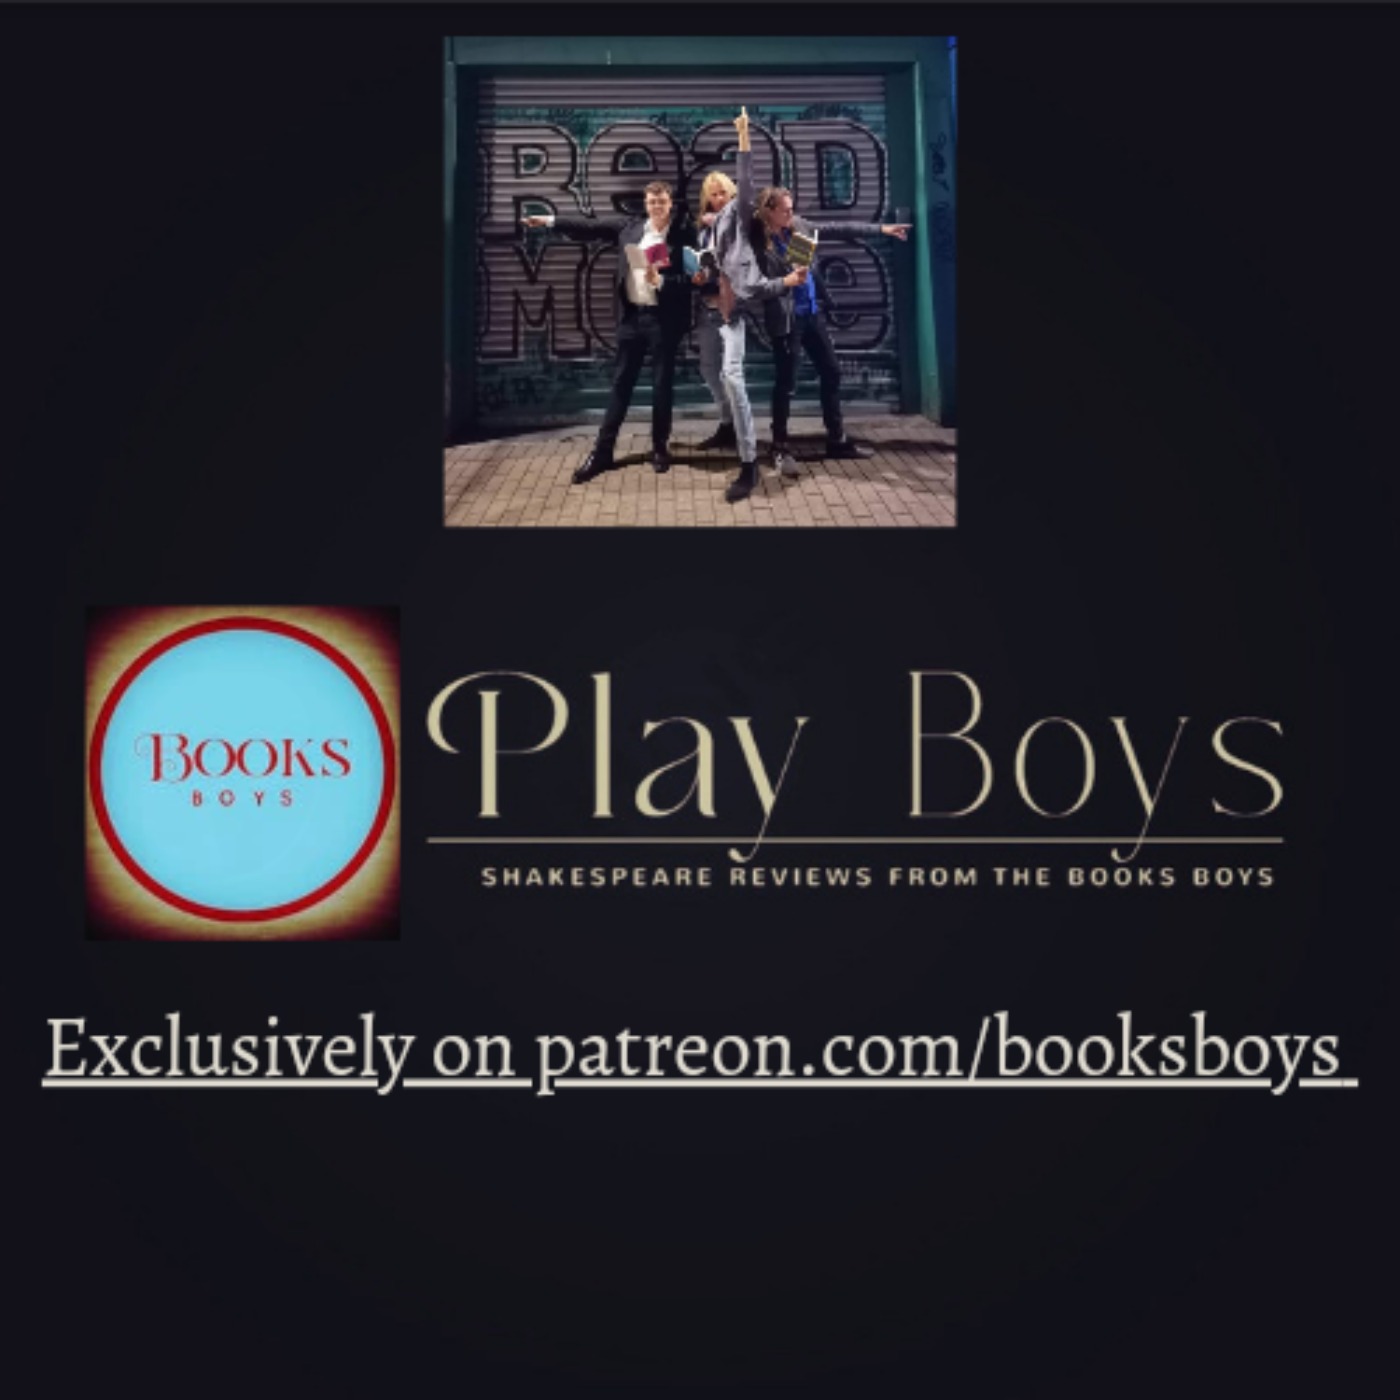 Playboys Episode 16: Titus Andronicus